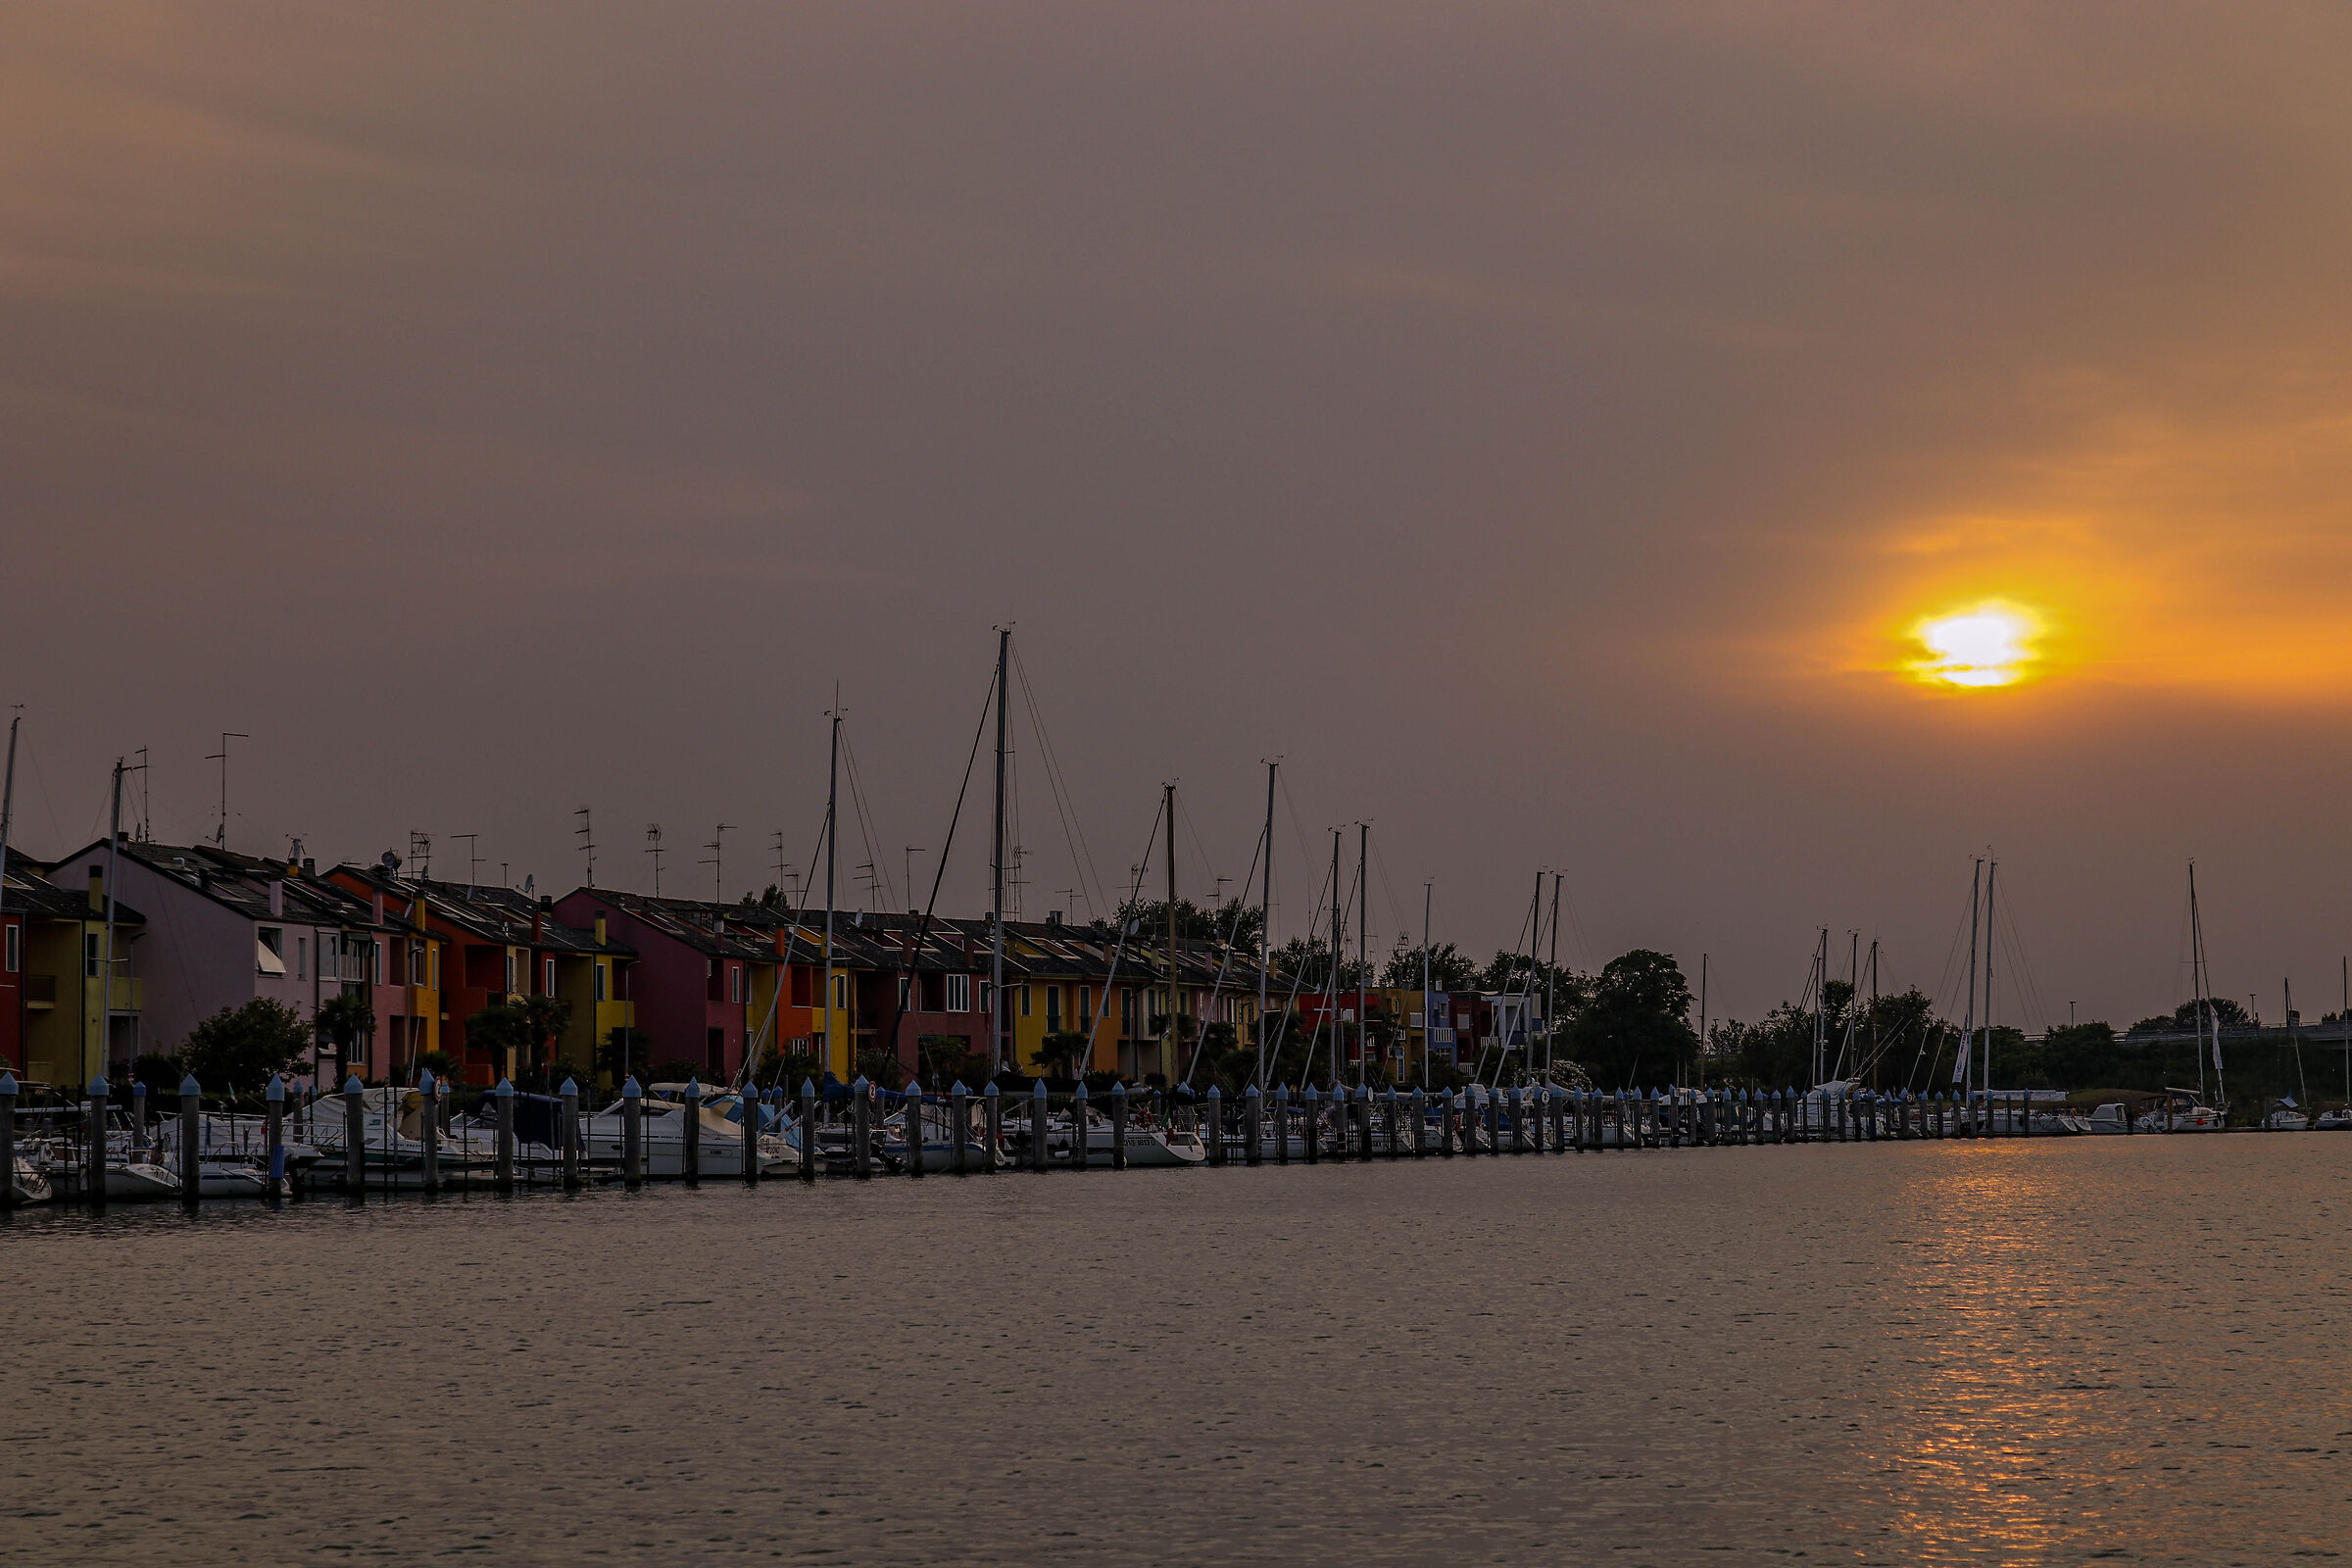 Sunset in Caorle...